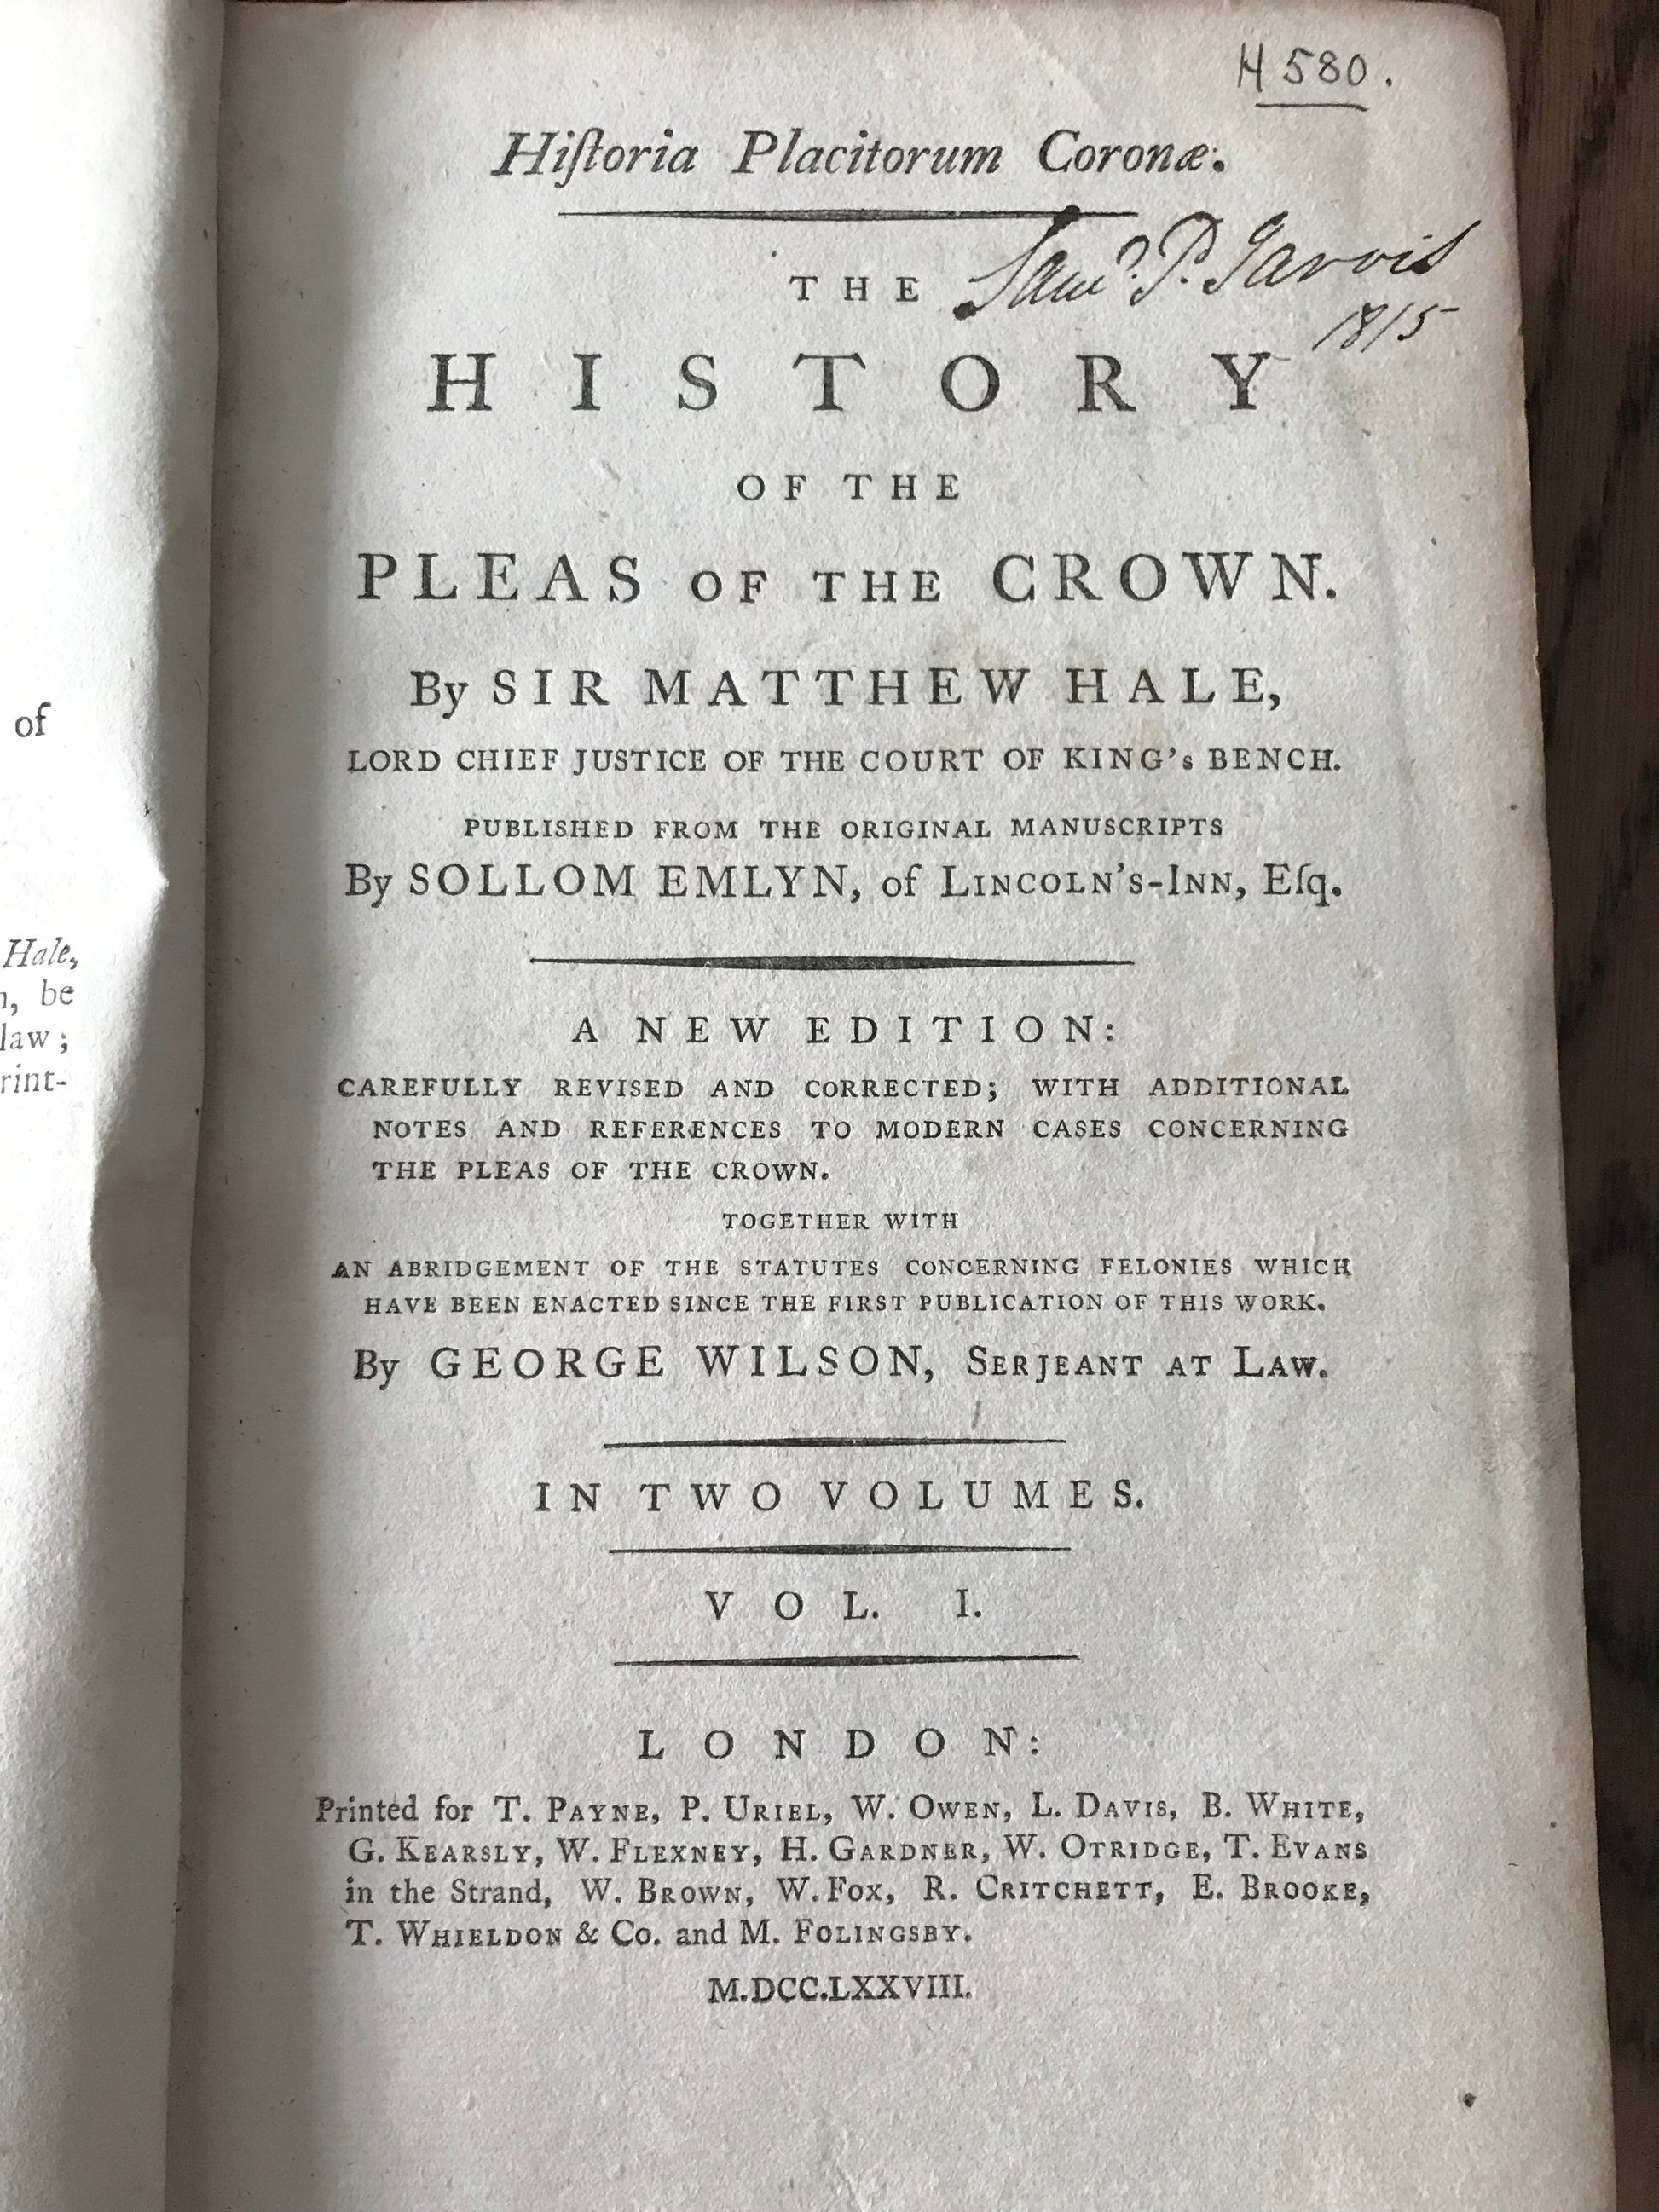 HISTORY OF THE PLEAS OF THE CROWN - SIR MATTHEW HALE BooksCardsNBikes